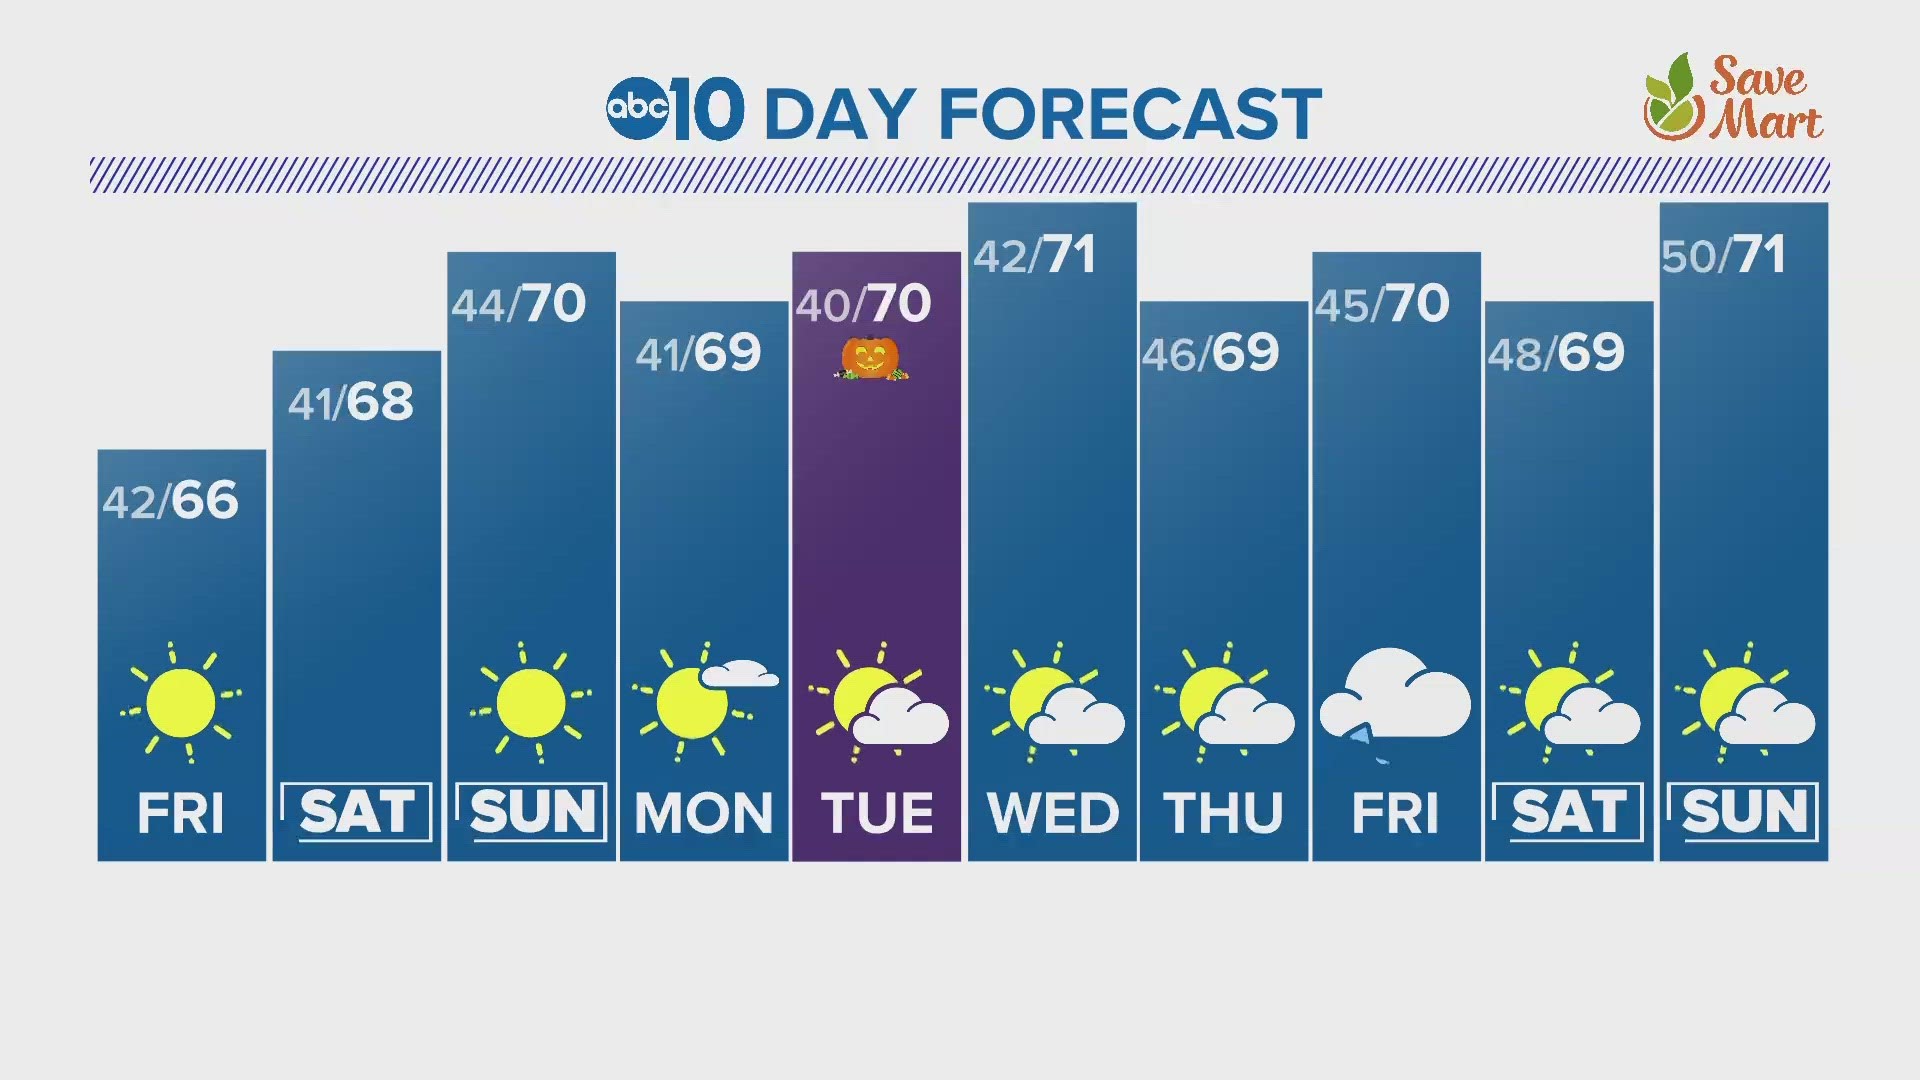 ABC10's Carley Gomez gives us a look at our 10-day forecast.